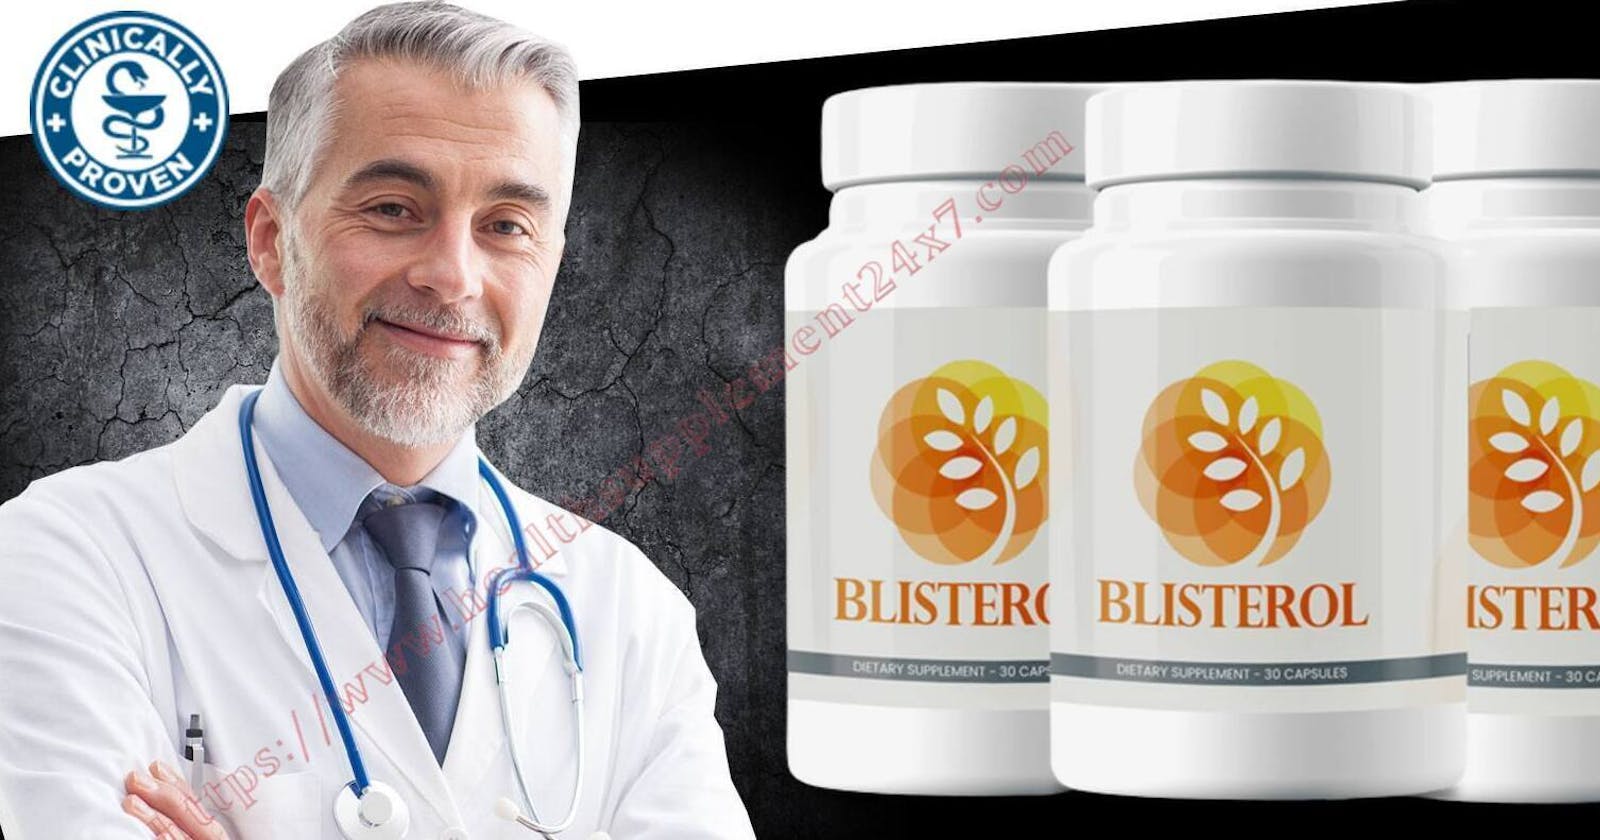 Blisterol Reviews Get Rid From Herpes Virus Does It Work | Where to buy, Advantages, Side Effects(Work Or Hoax)